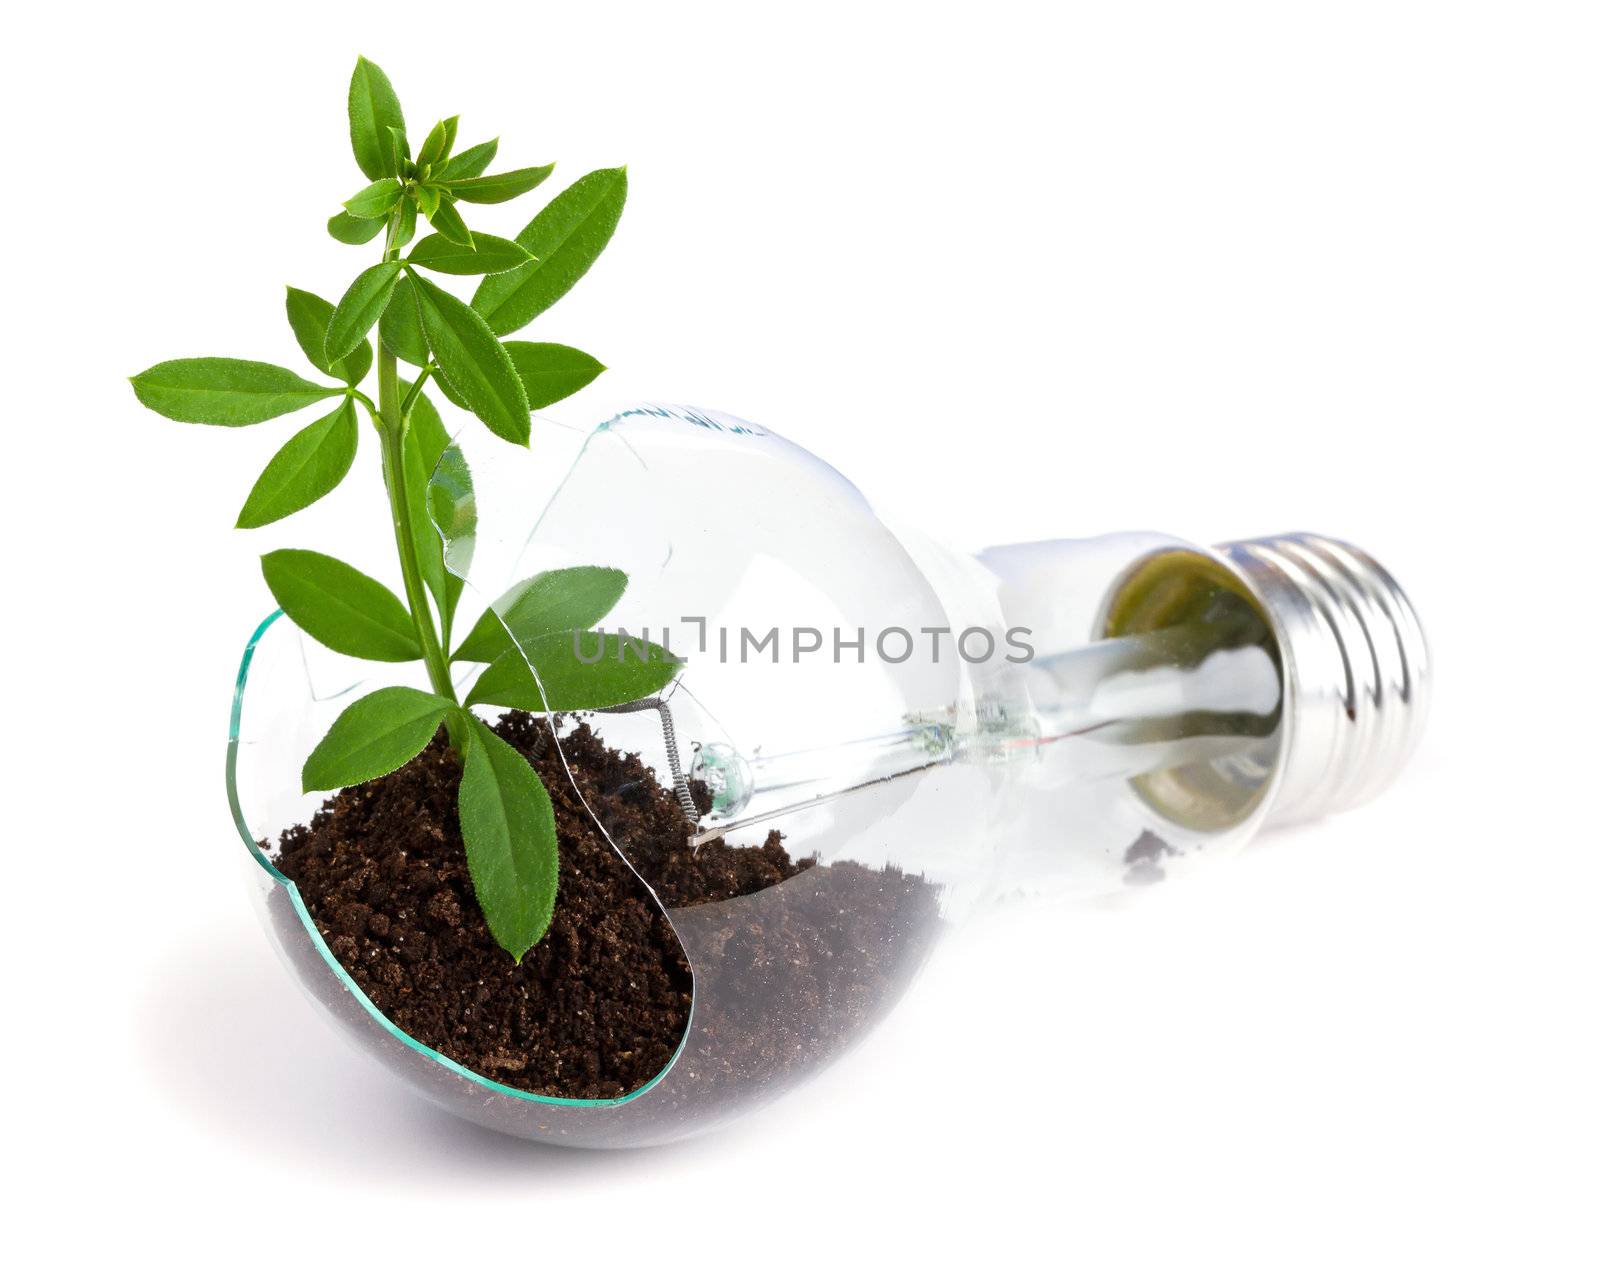 lightbulb with plant growing inside